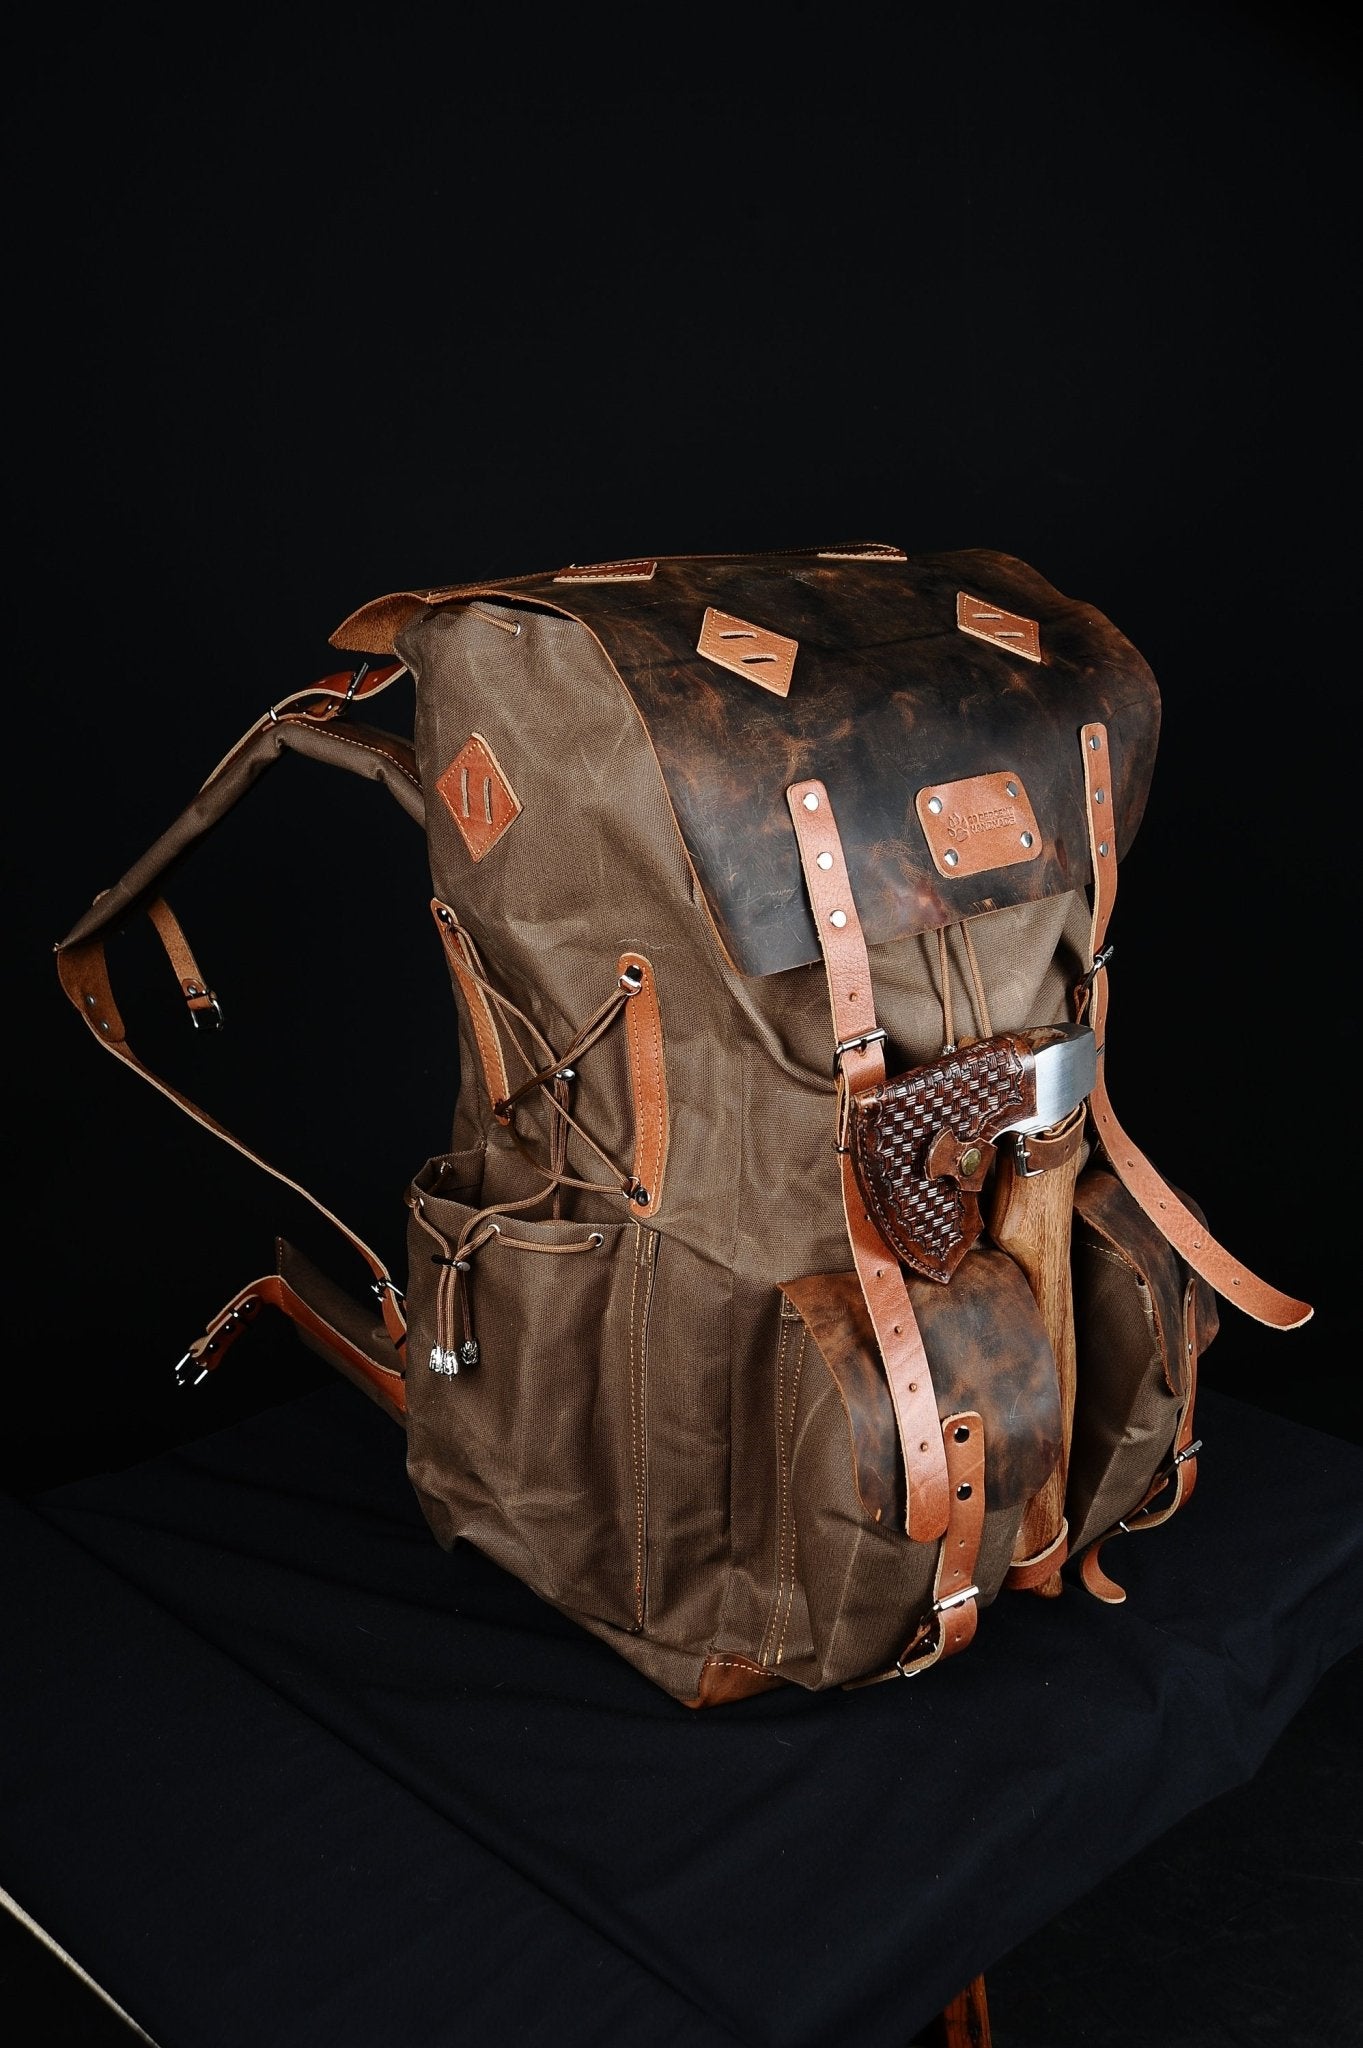 Limited | Bushcraft Backpack | Camping Backpack | Waxed Canvas with Leather Details Backpack for Travel, Camping | 70 L | Personalization  99percenthandmade   